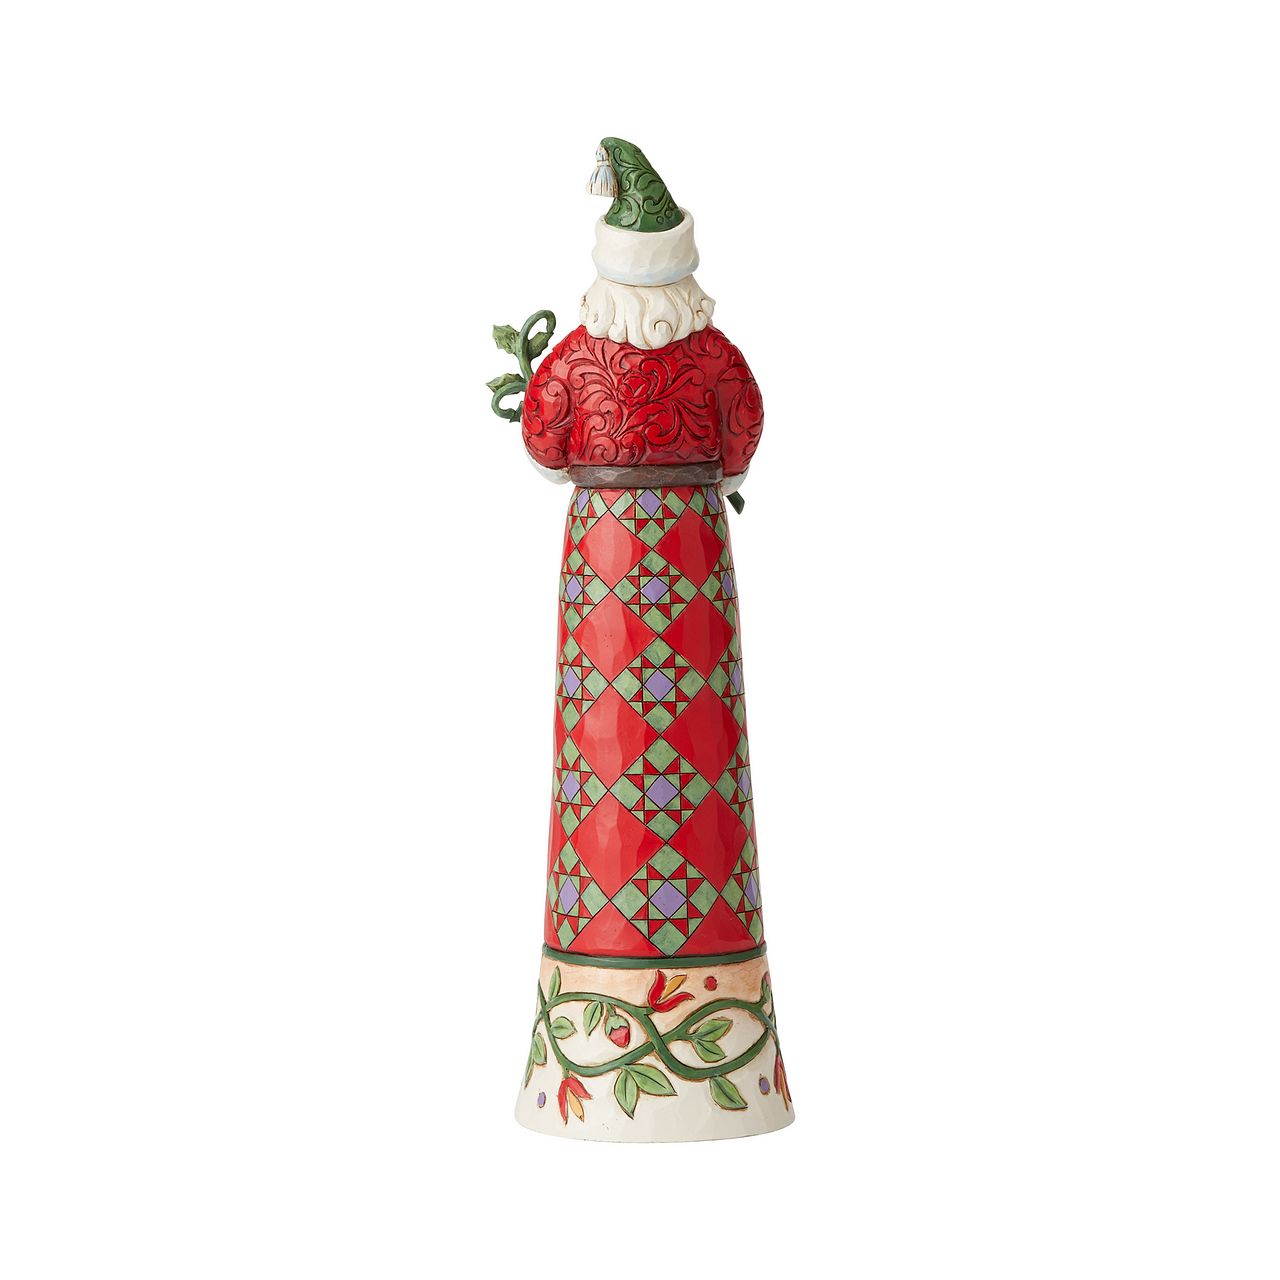 Jim Shore Tall Santa Making Spirits Splendid Figurine  This elegantly proportioned Tall Santa with Branch features a robe decorated with Jim Shore's signature eight-pointed star quilt block patterns accented with a hem of intricate interlocking rosemaling design.